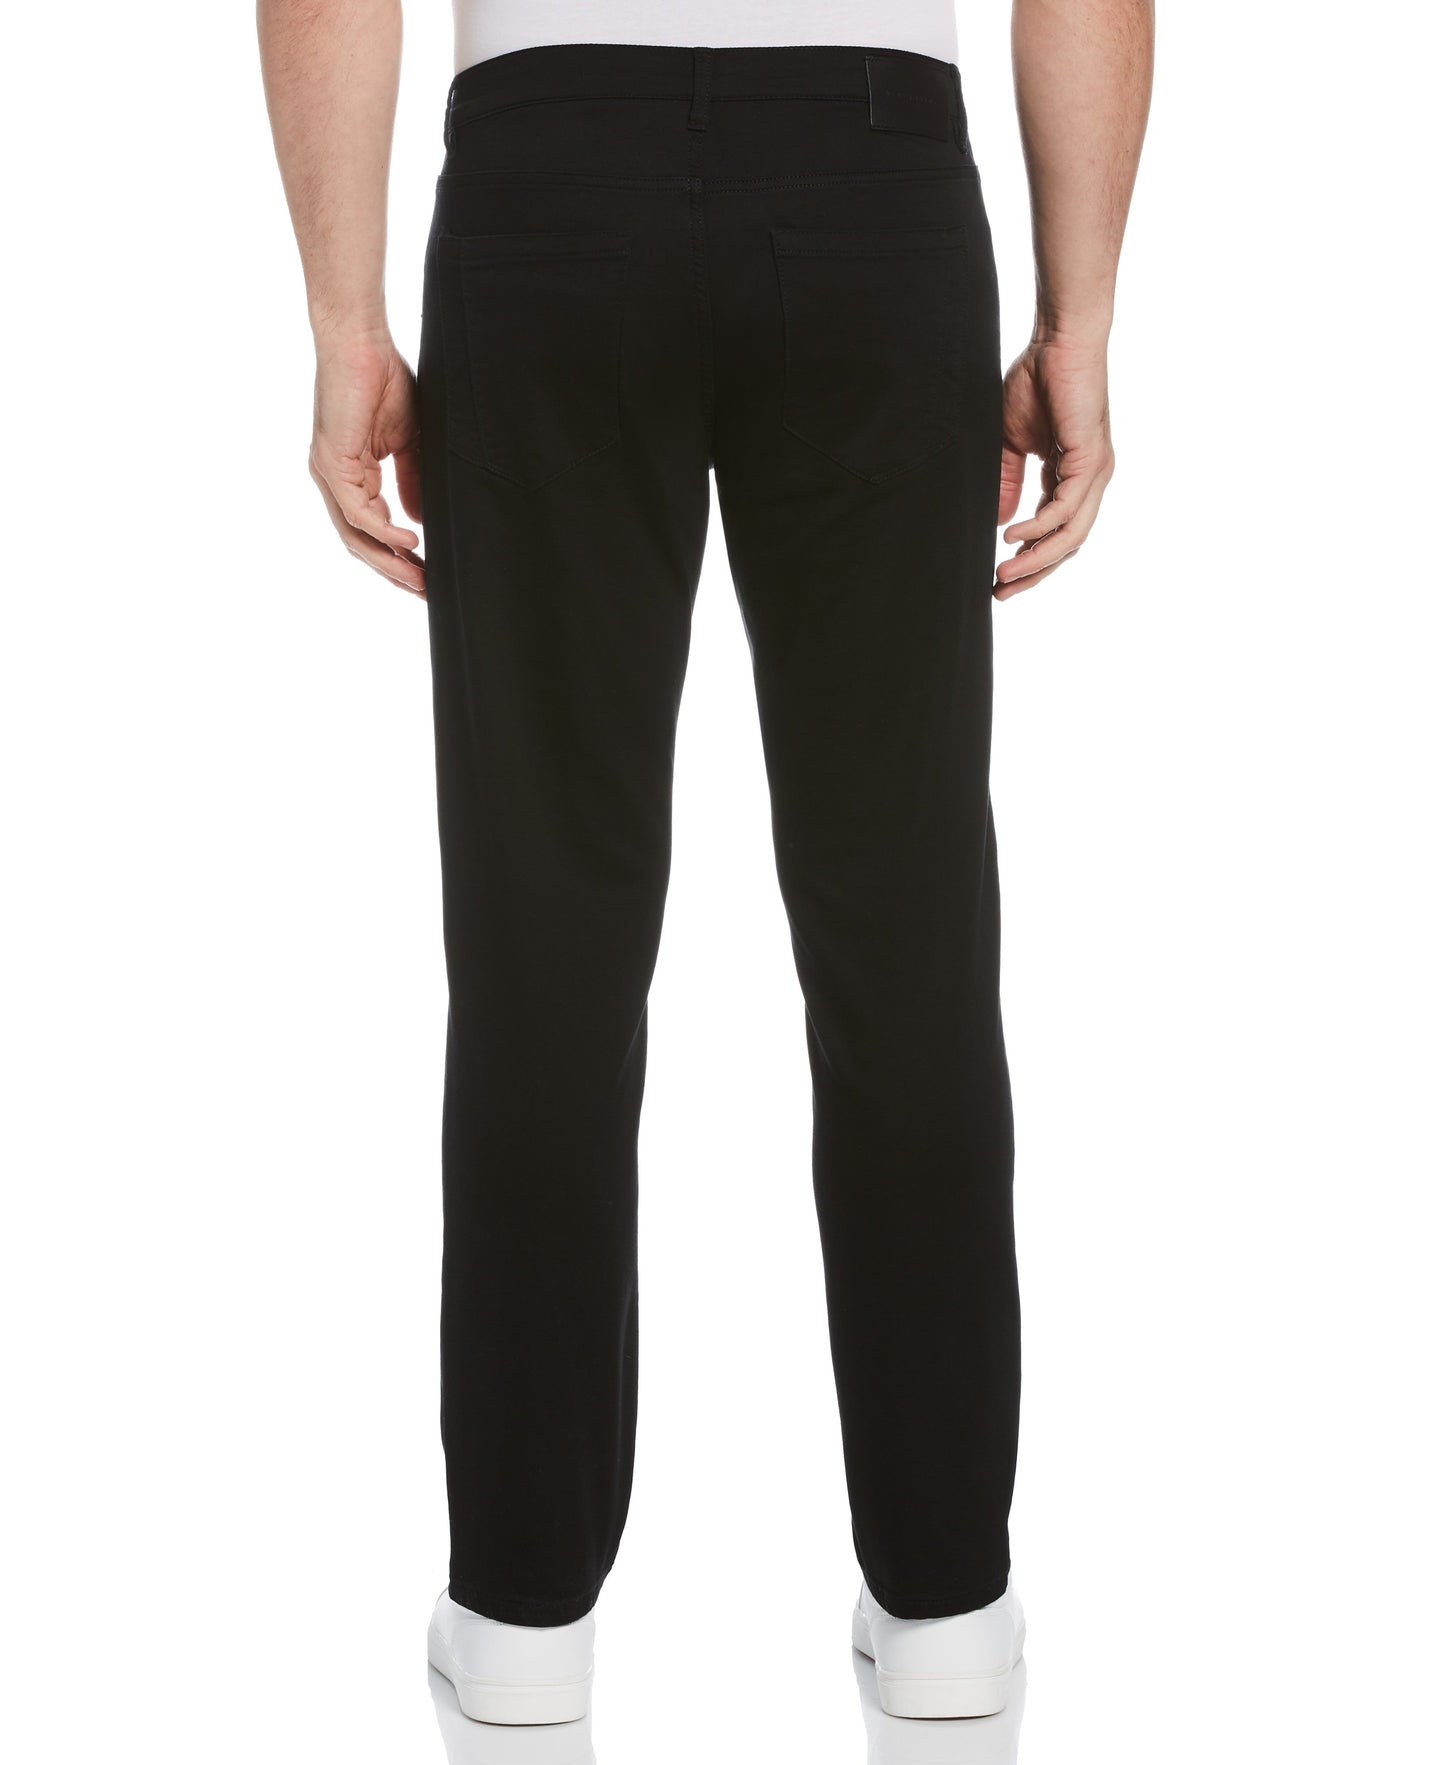 Tall Slim Fit Anywhere Pant